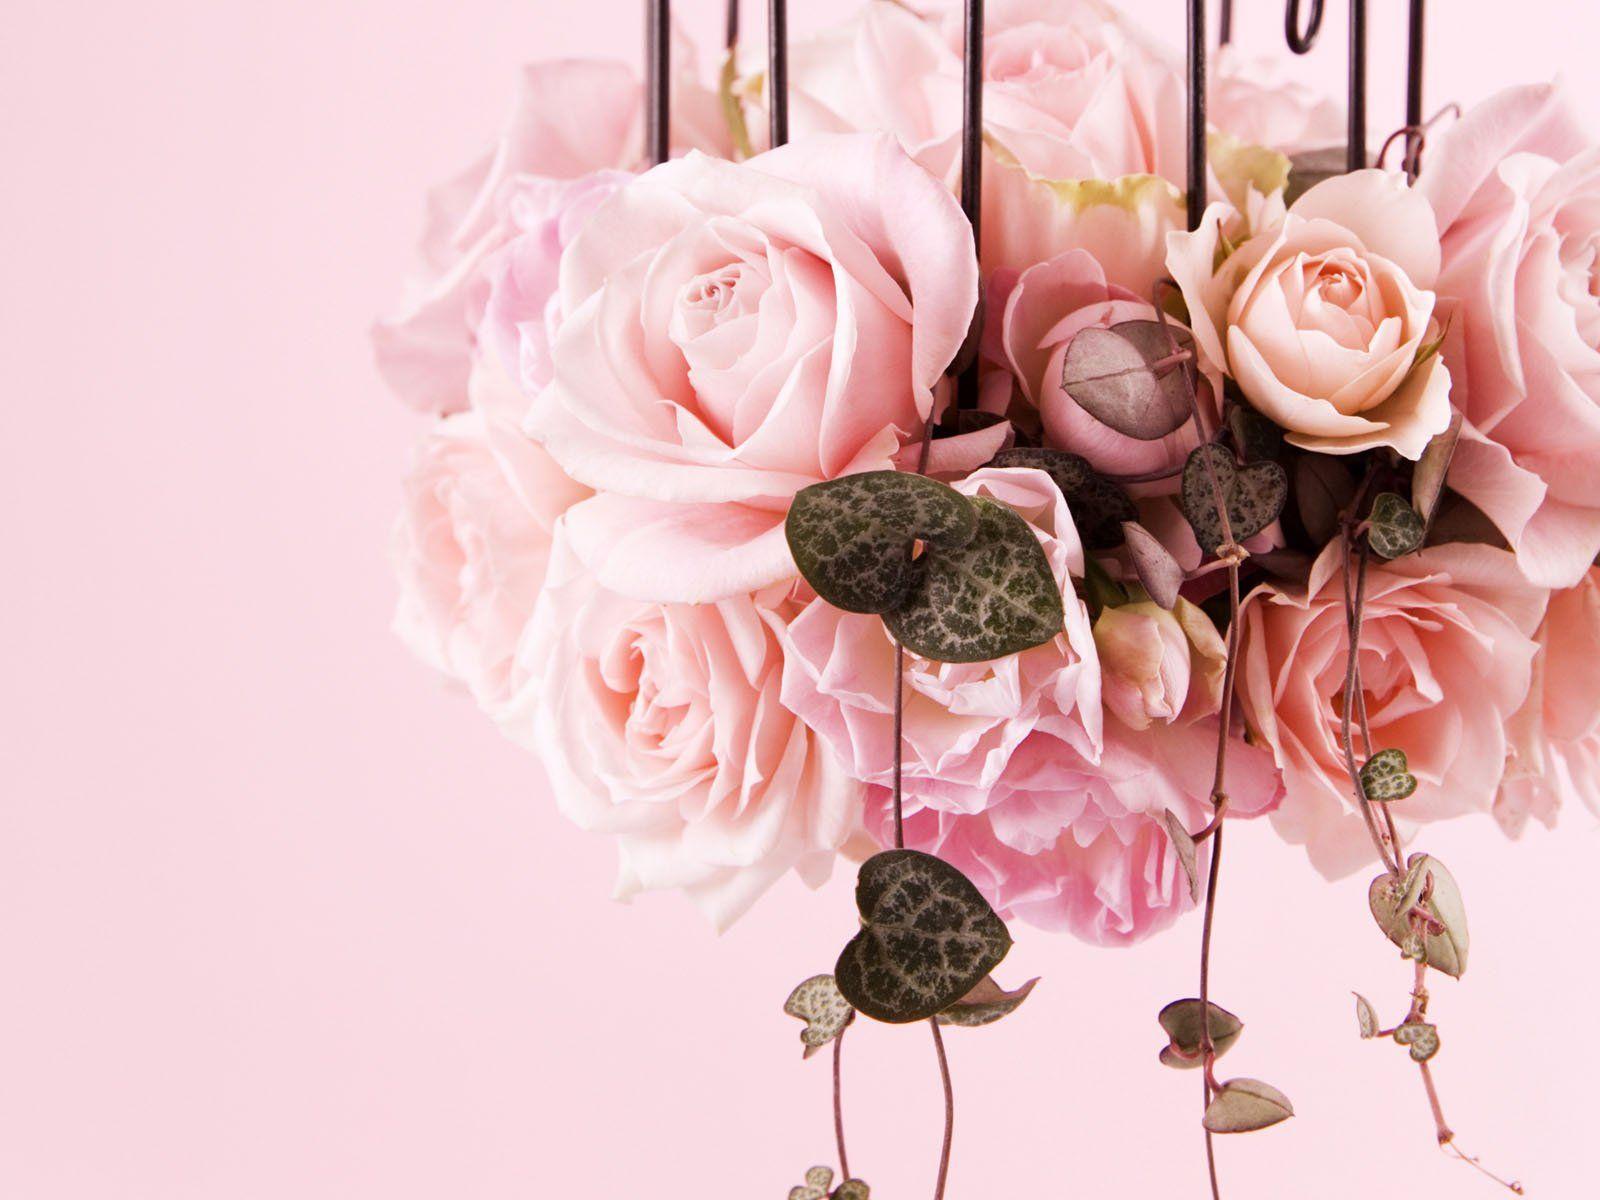 Roses Bouquet Wallpaper. Roses Bouquet Background and Image